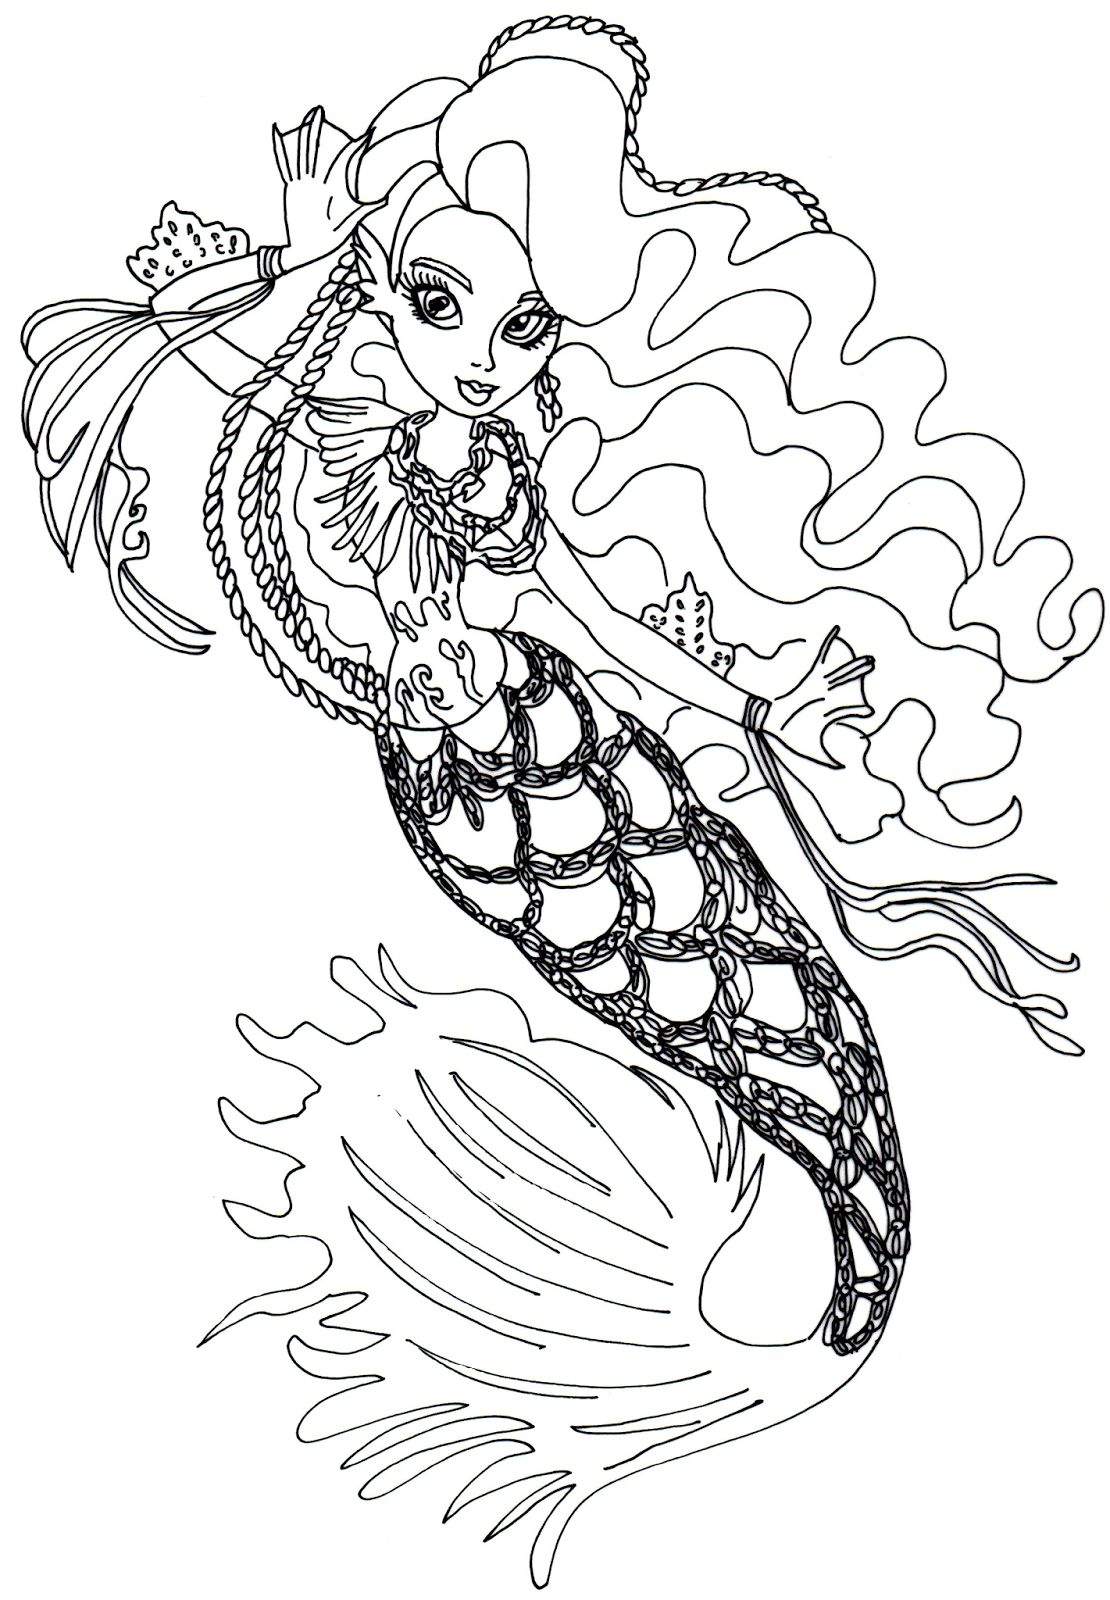 Free printable monster high coloring page for Sirena Von Boo in her basic outfit